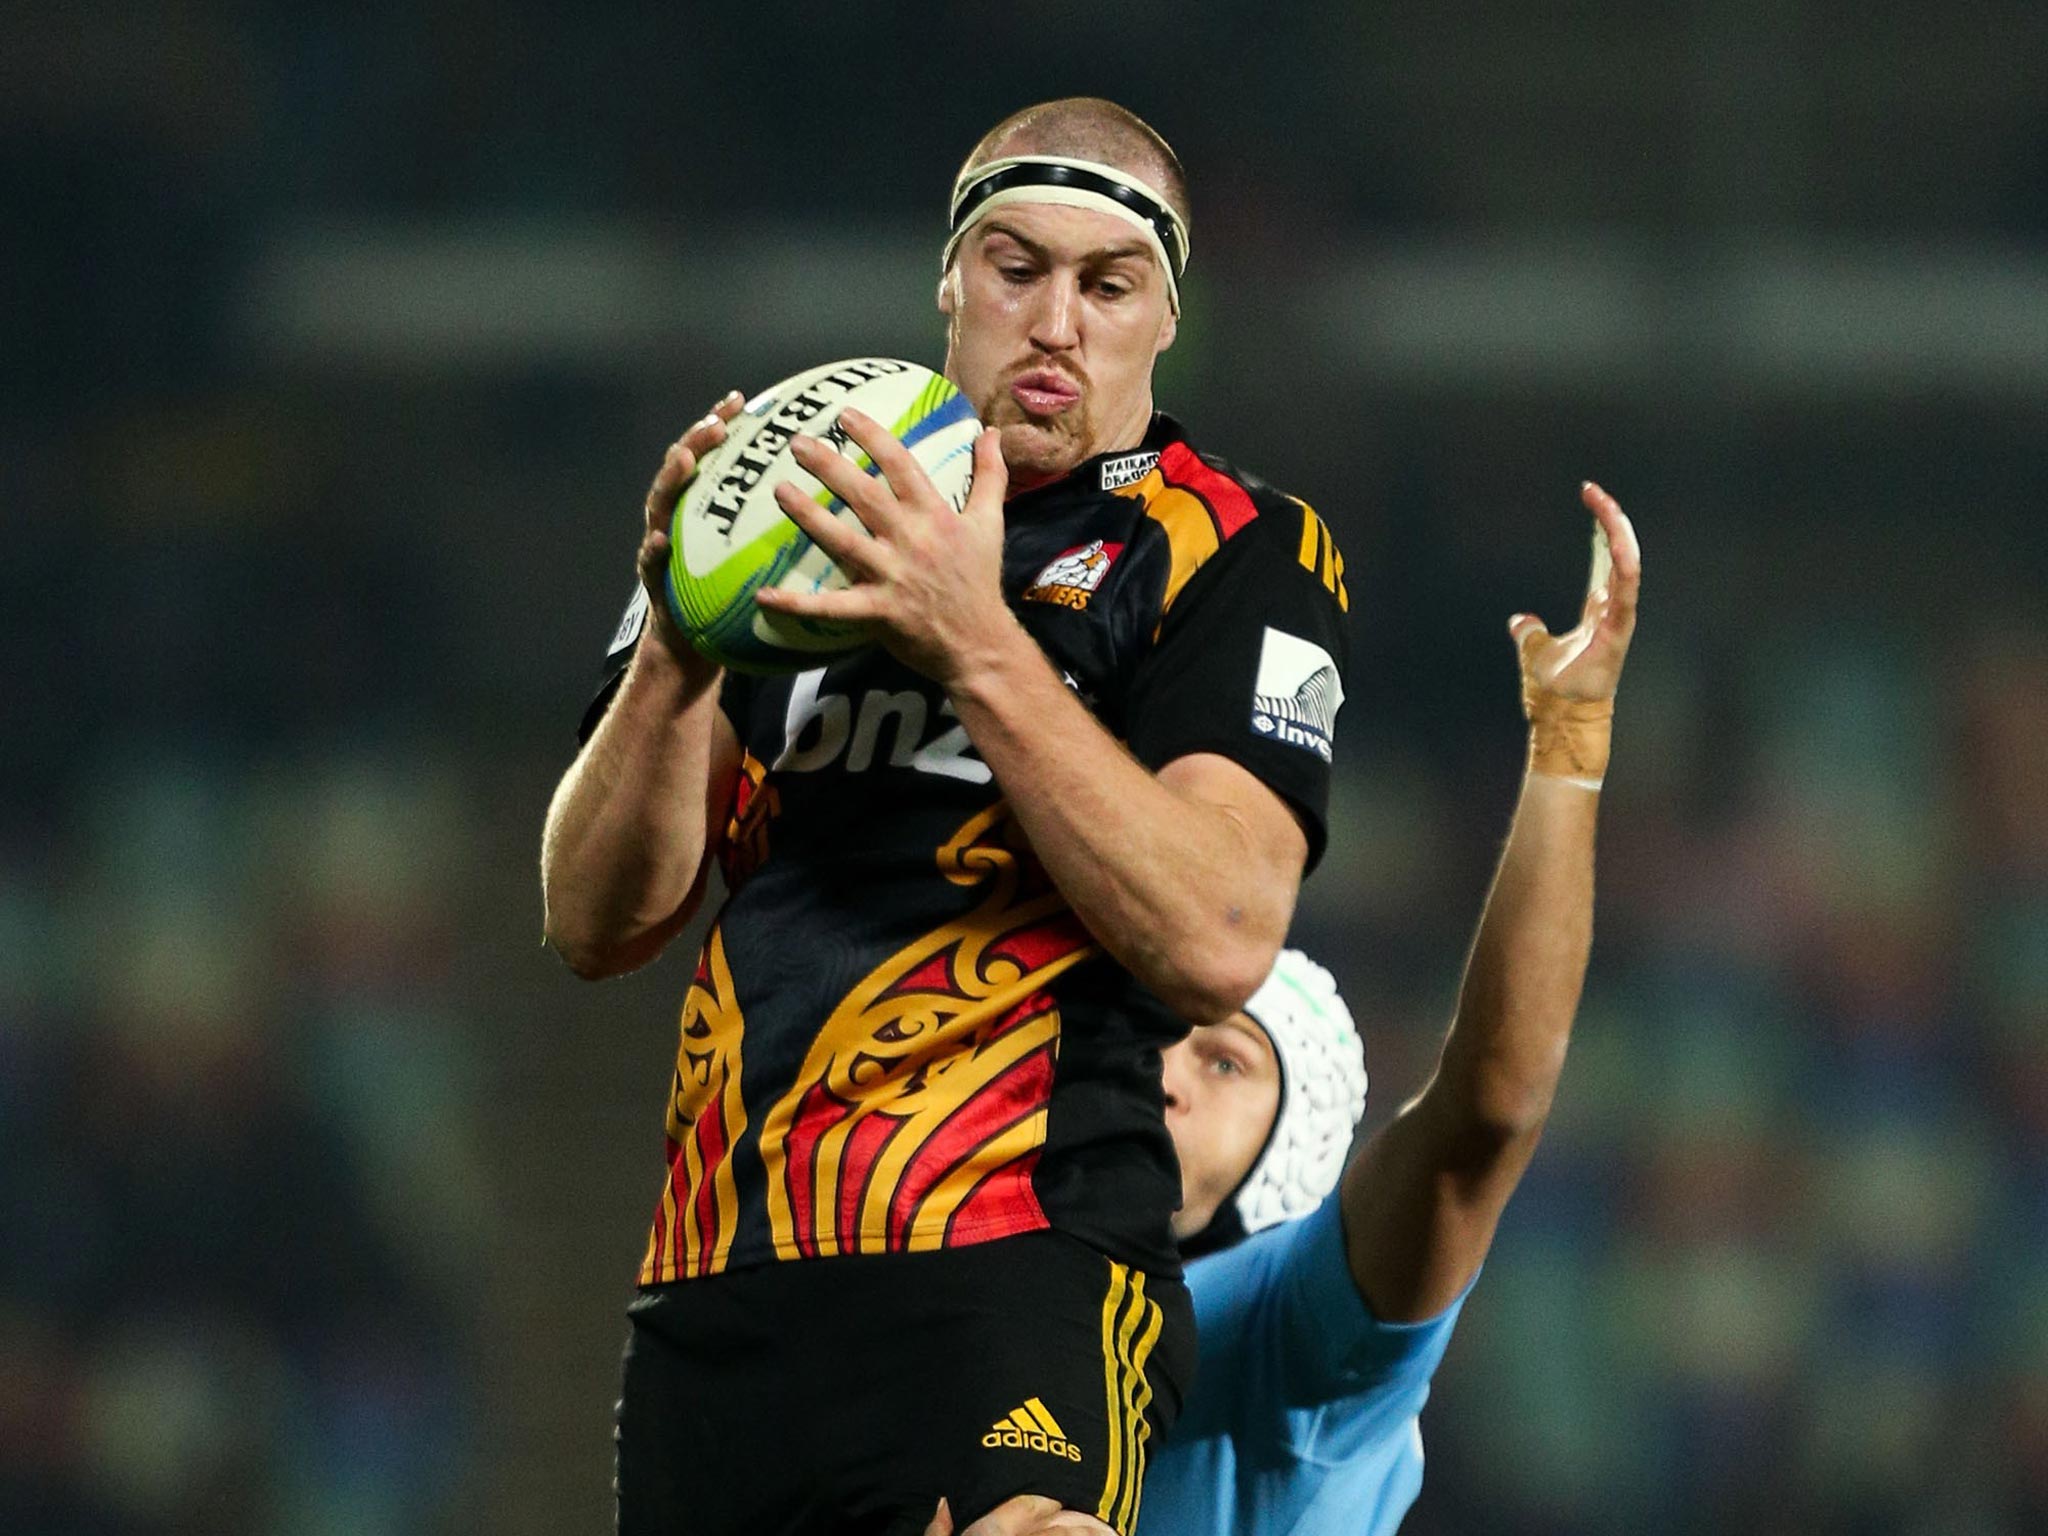 The All Black lock Brodie Retallick has been too busy playing hard games for the Chiefs to take much notice of England’s tour party